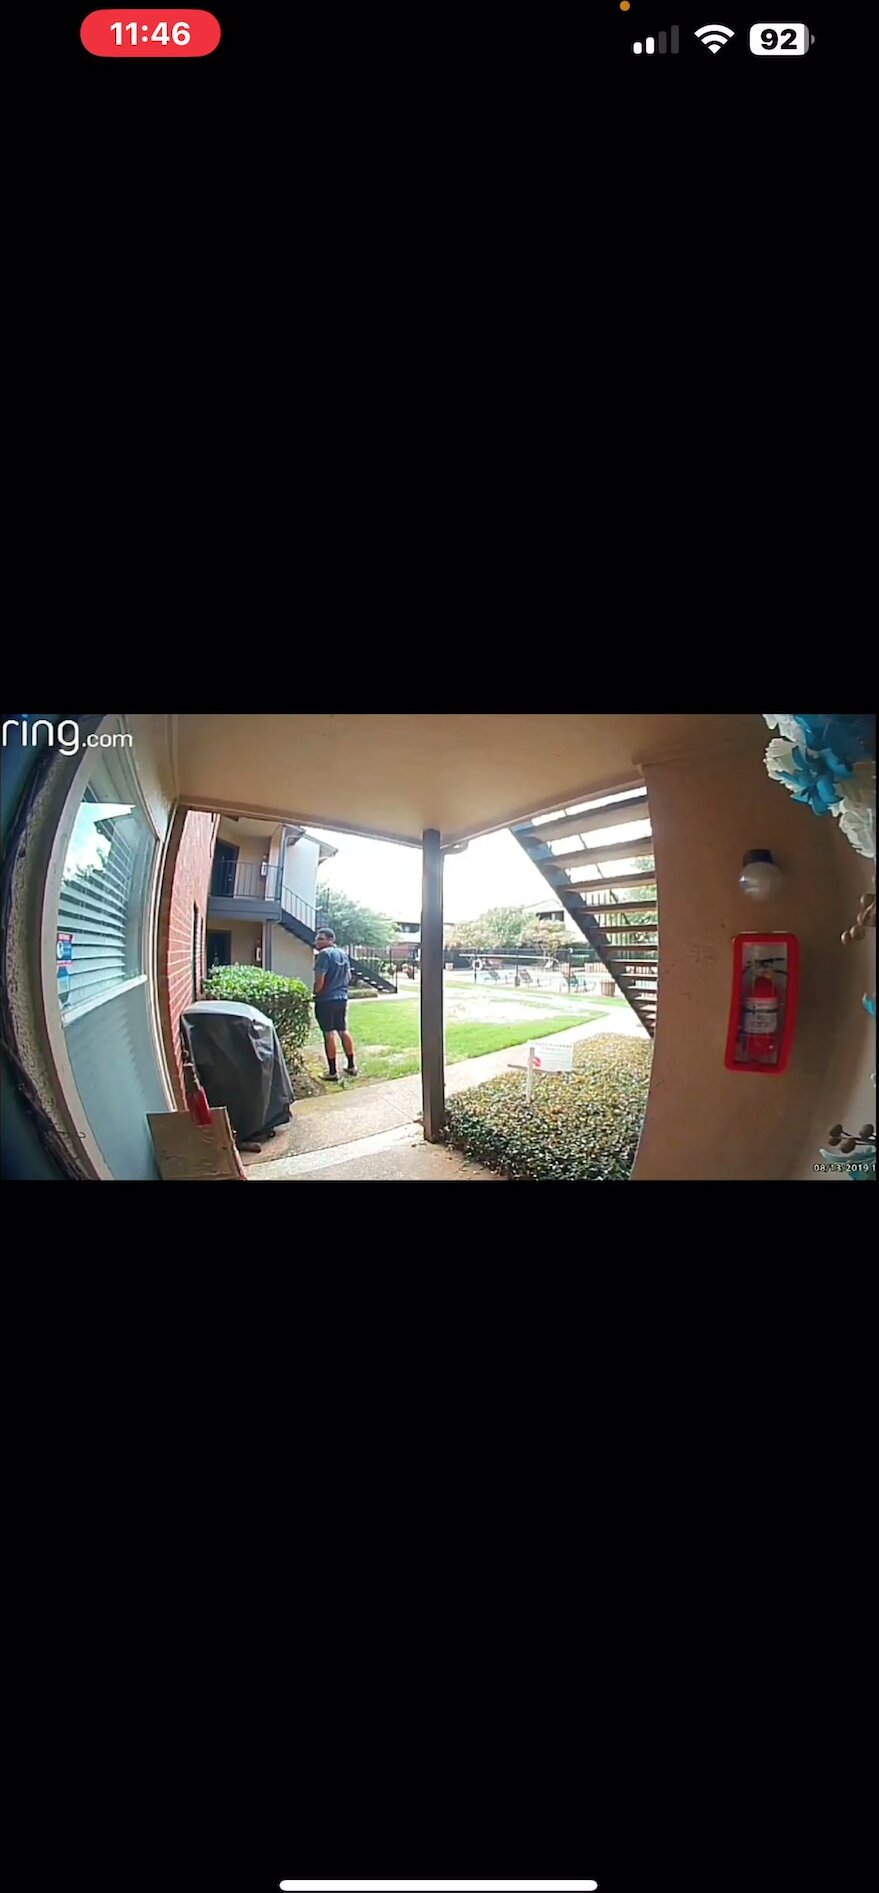 ... delivery driver pissing in clients grass